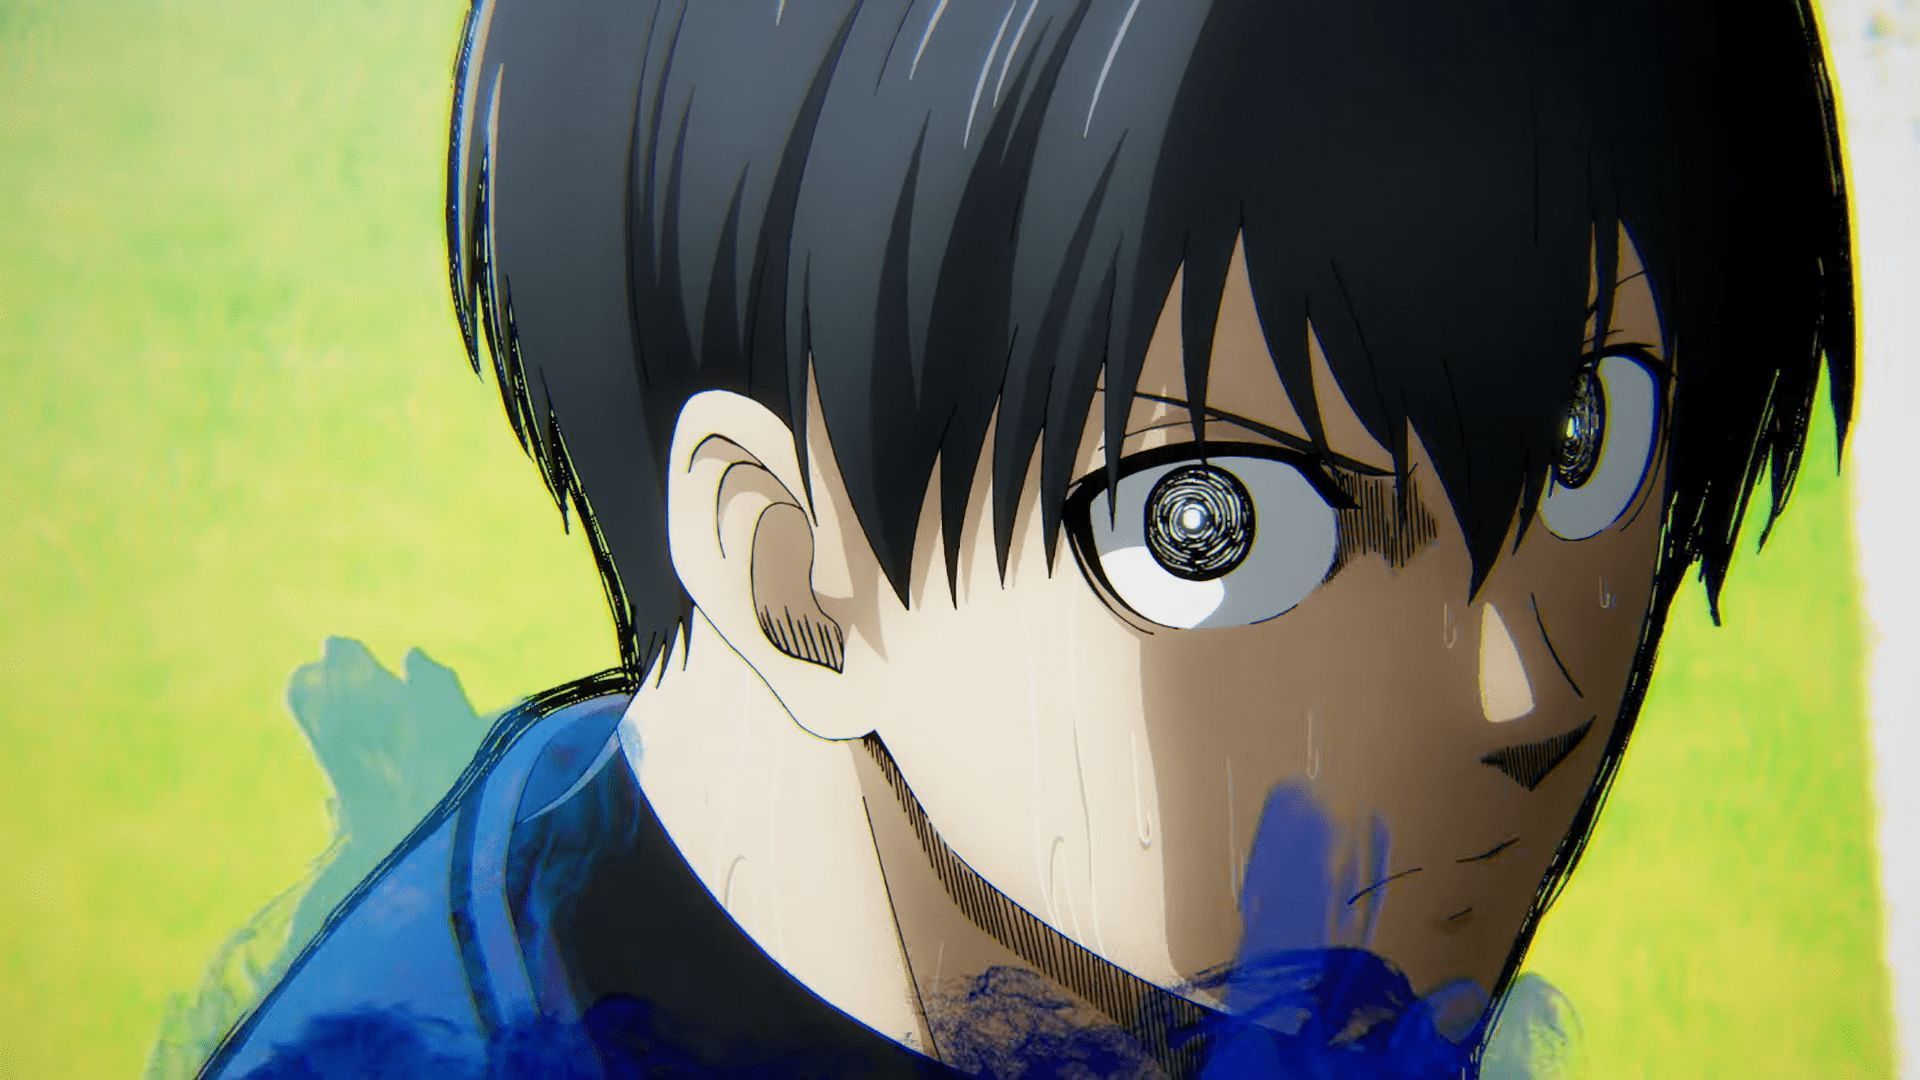 Another screenshot associated with the anime (Image via Eight Digit)